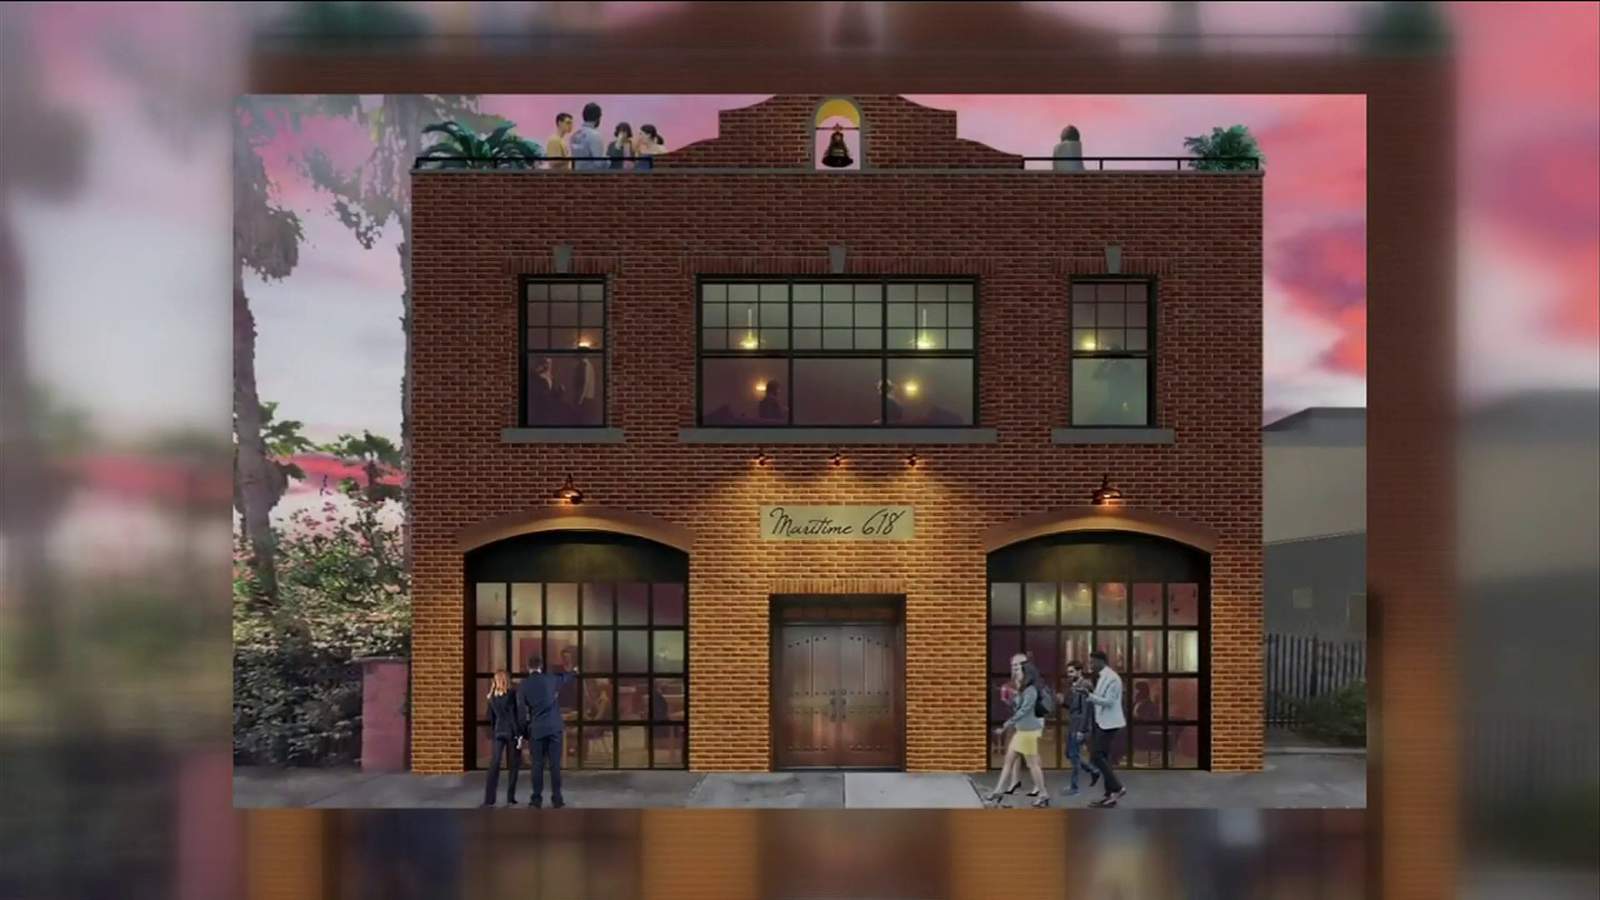 Reality TV star says Jacksonville restaurant will feature celebrity chefs, ‘edgy’ vibe